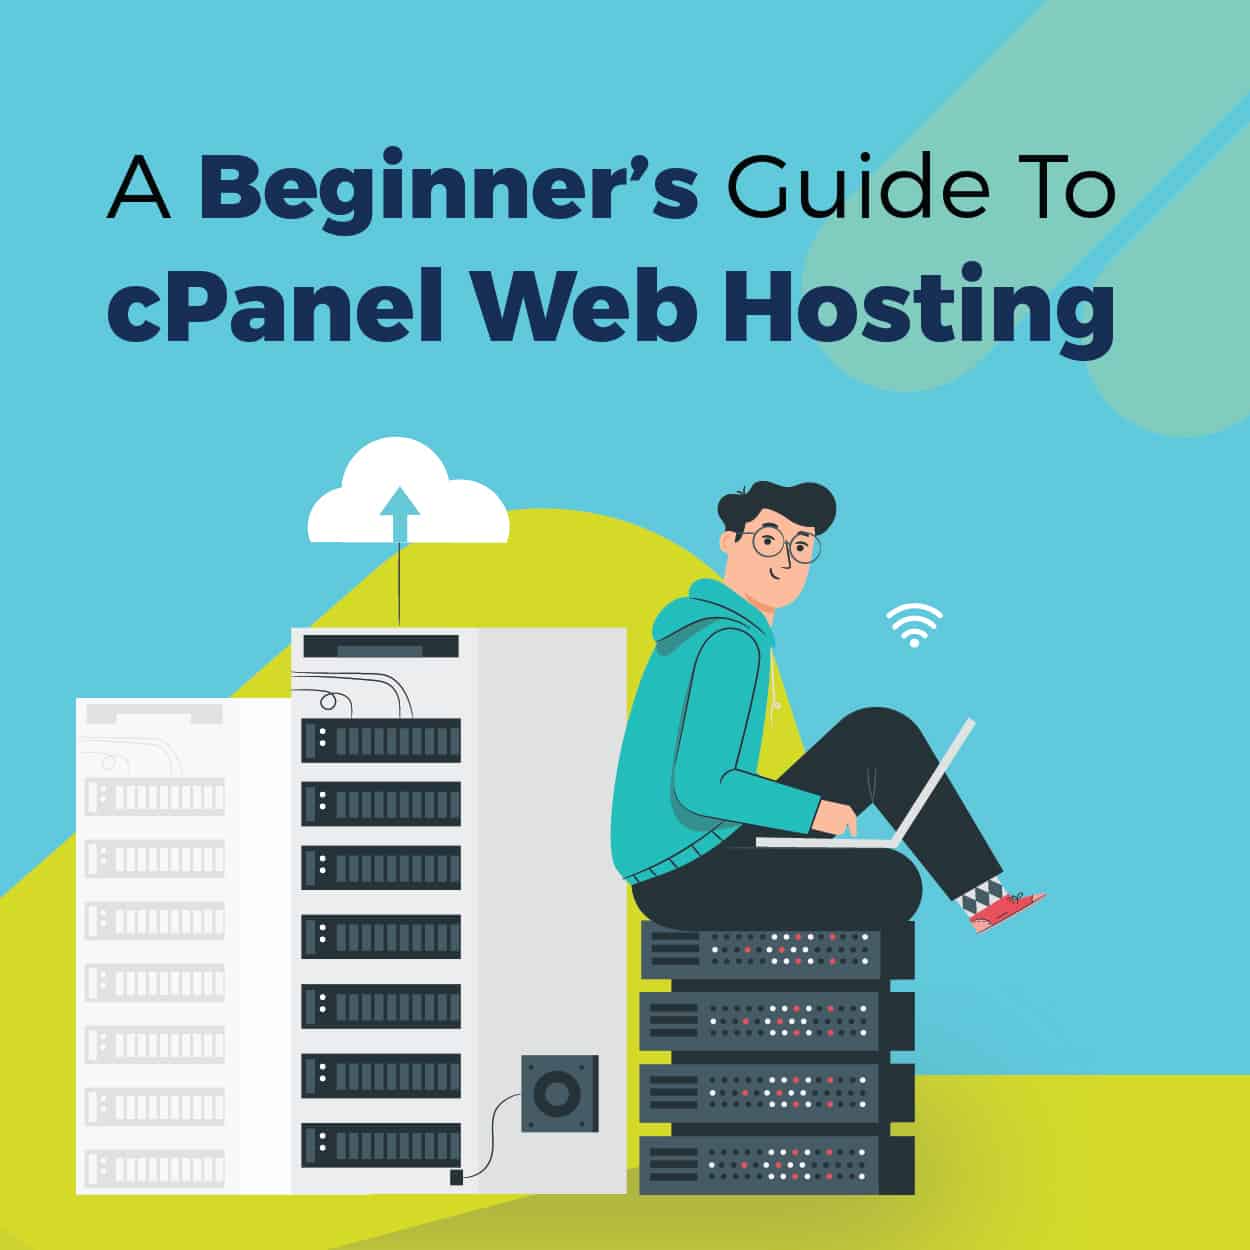 A Beginner’s Guide to cPanel Web Hosting